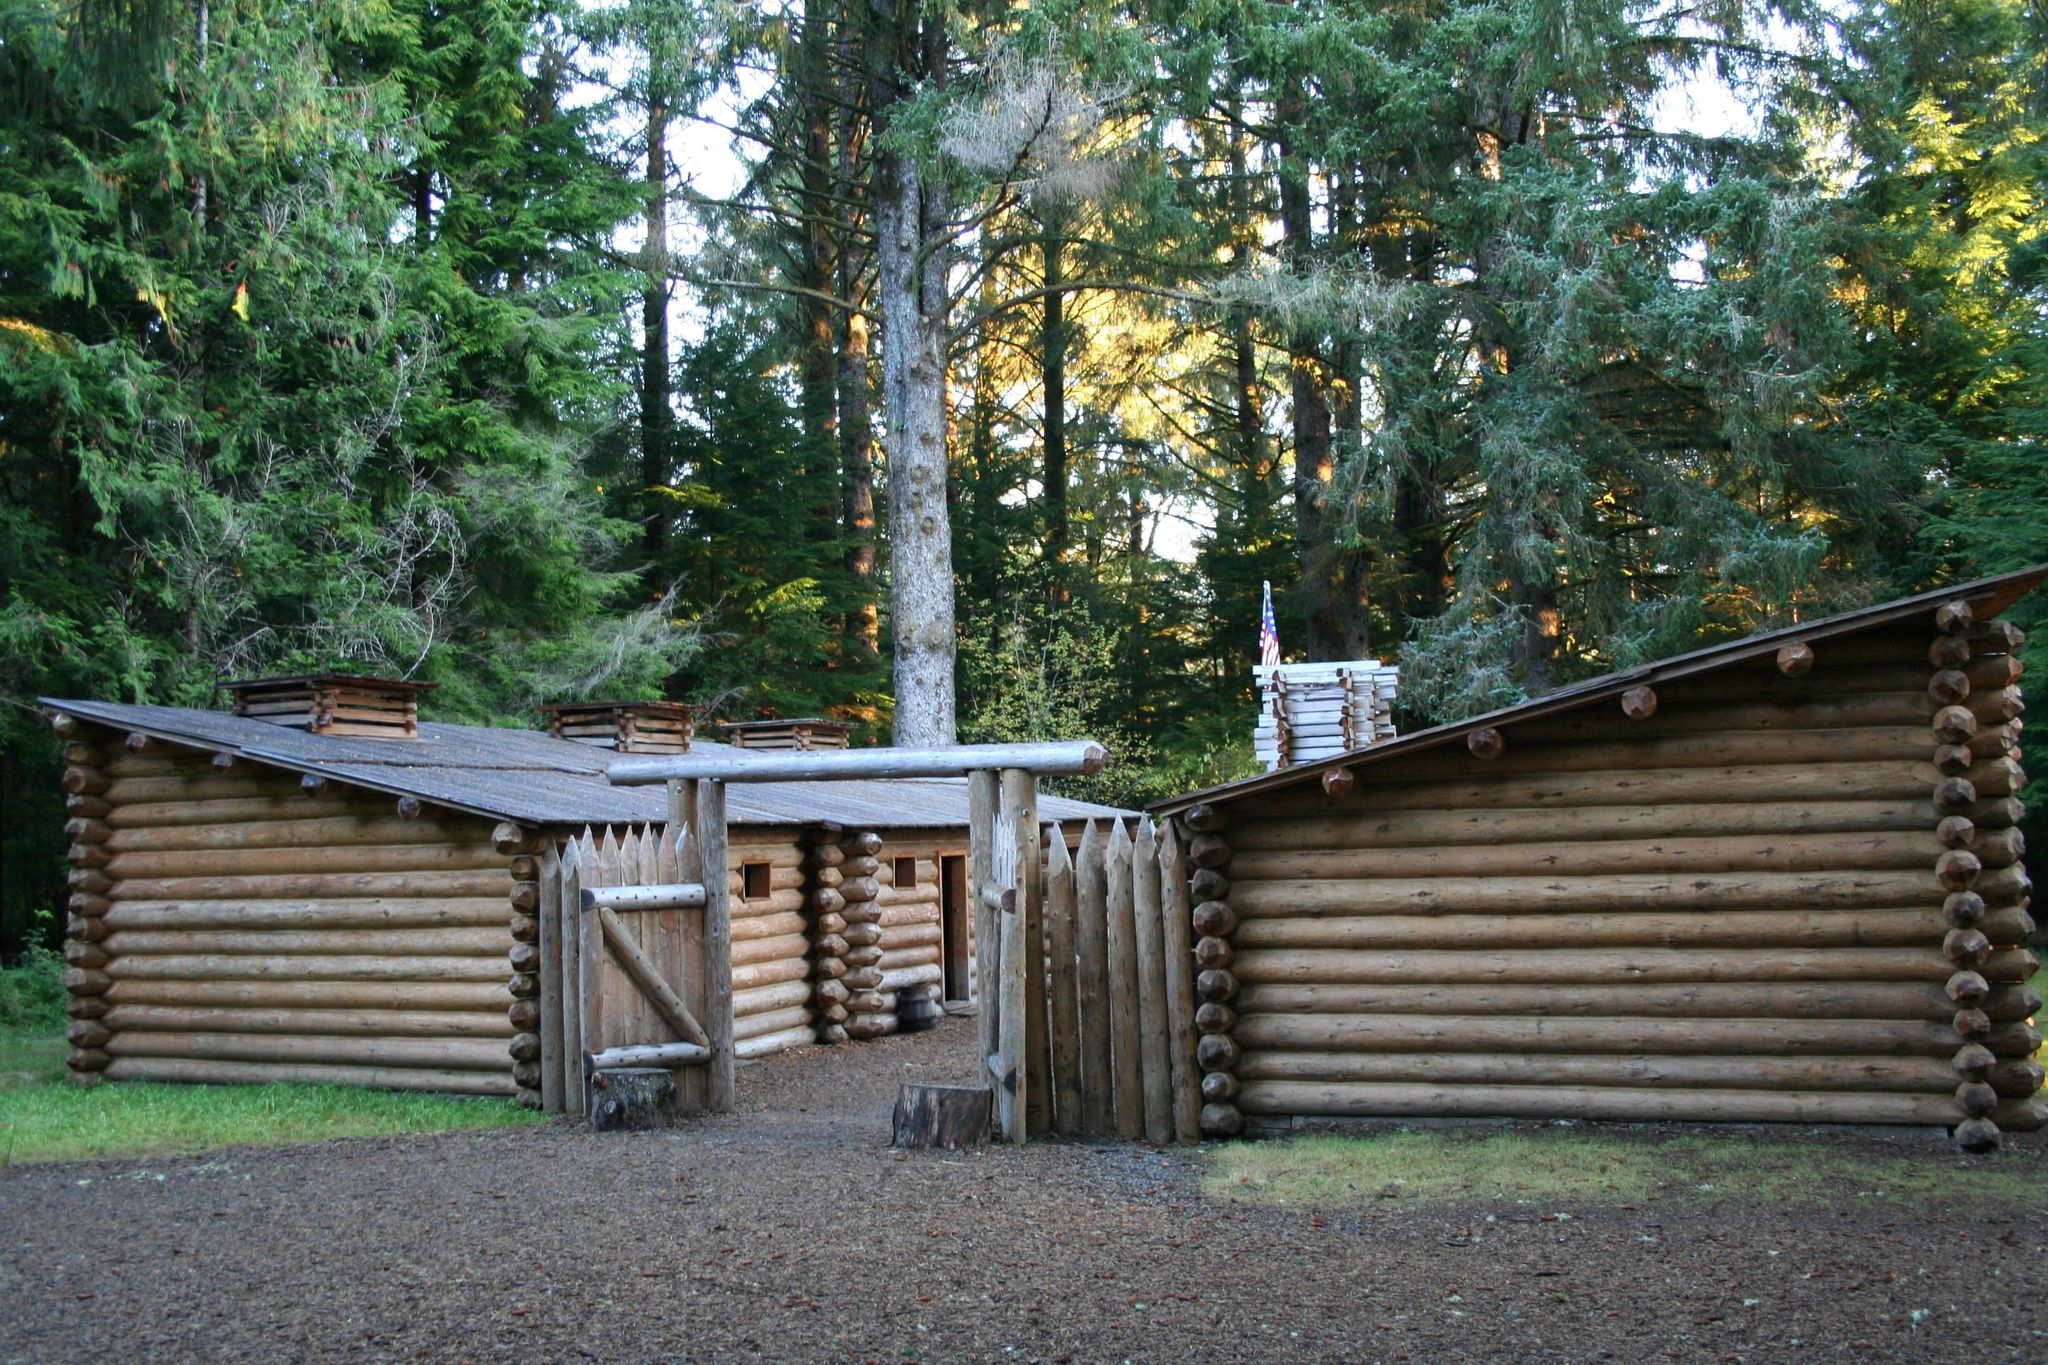 The second replica of Fort Clatsop is the main attraction at Lewis and Clark National Historical Park